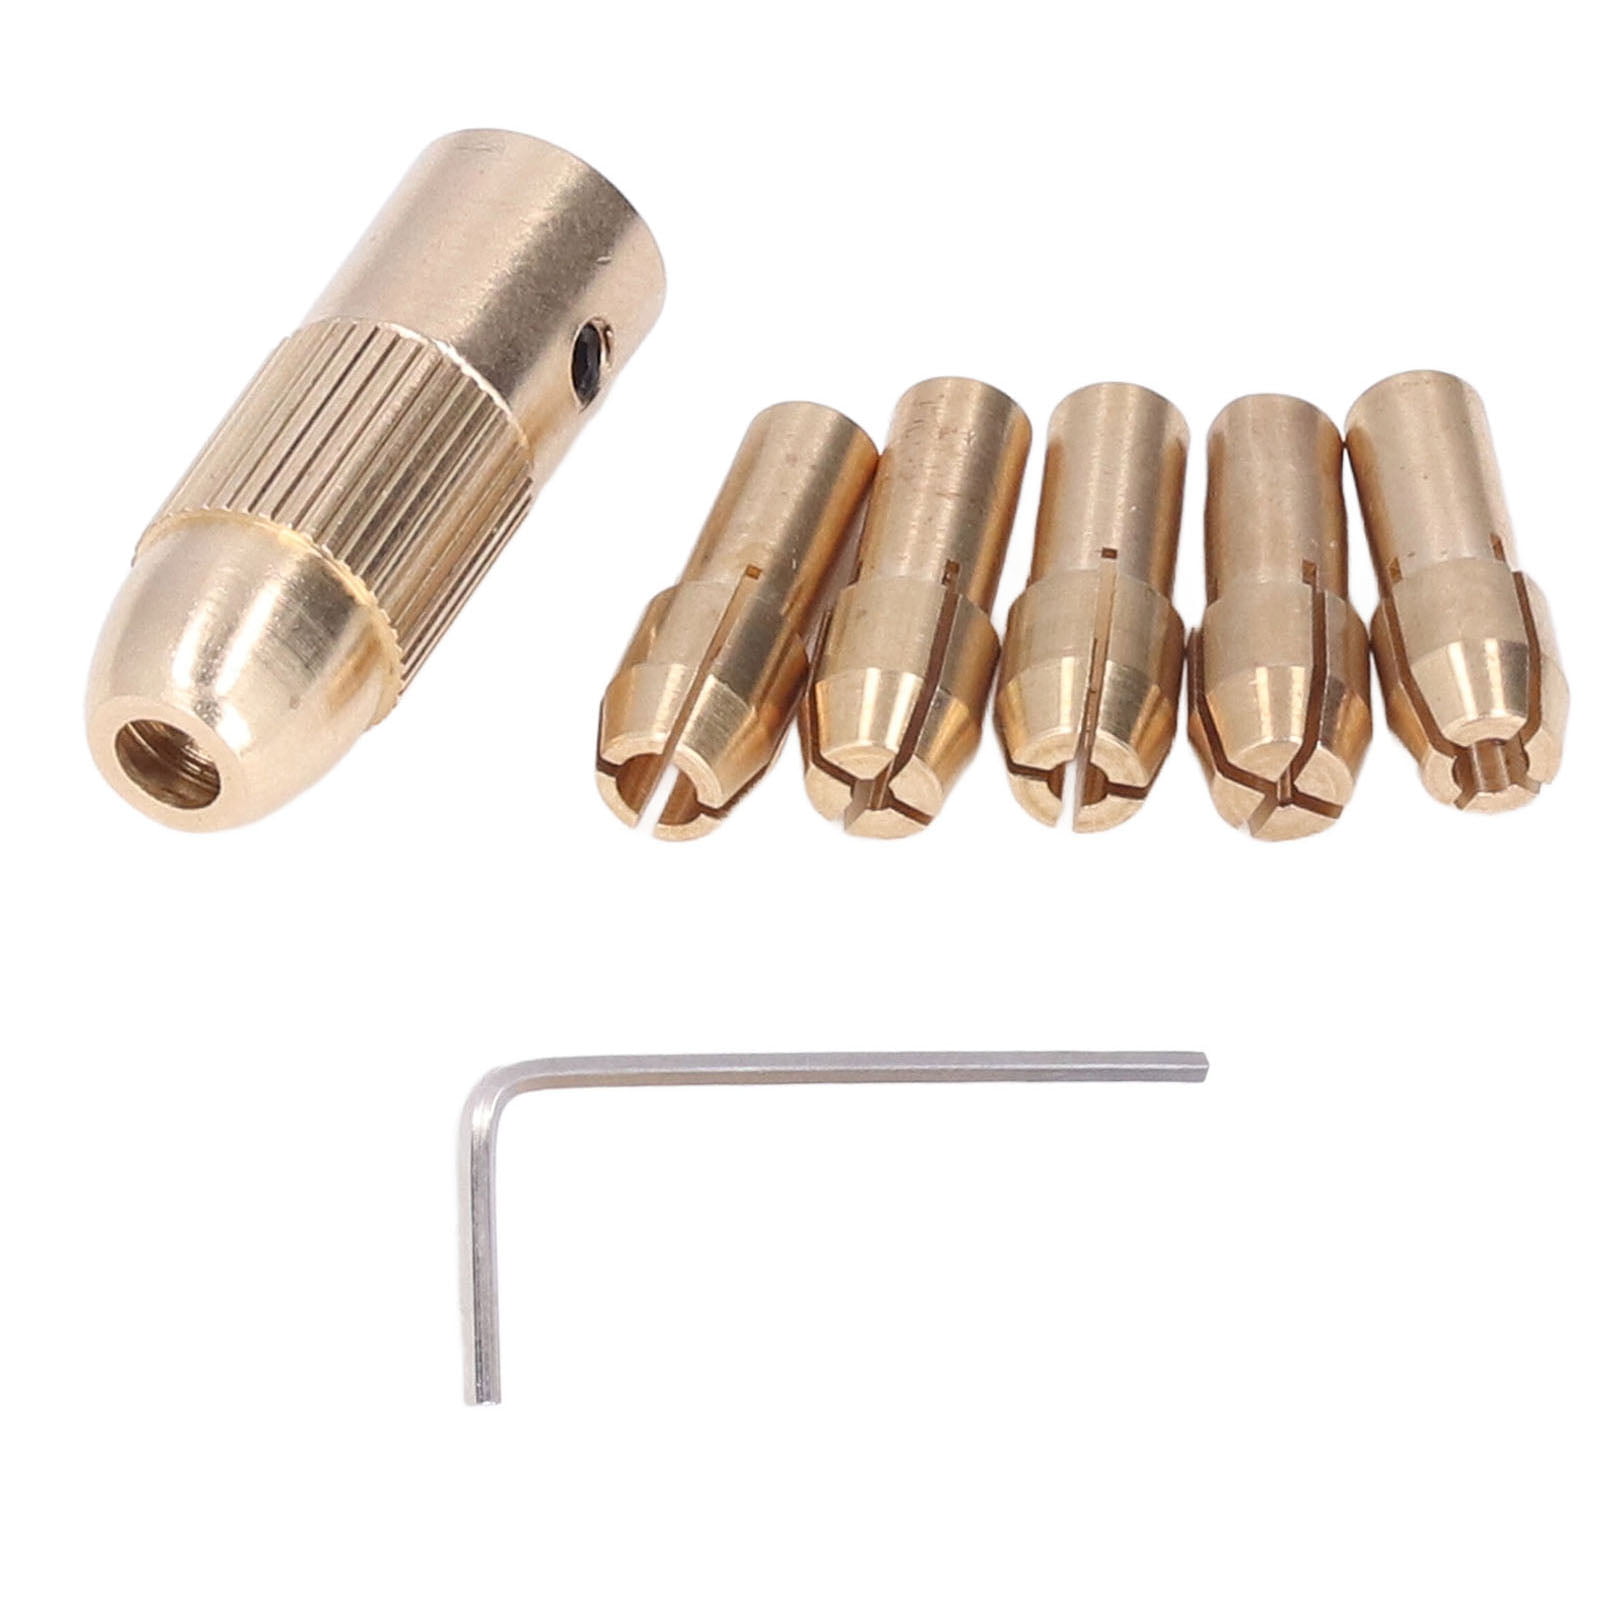 0.5-3.0mm Small Drill Bit Chunk Collet Electric Grinding Polishing Accessories 